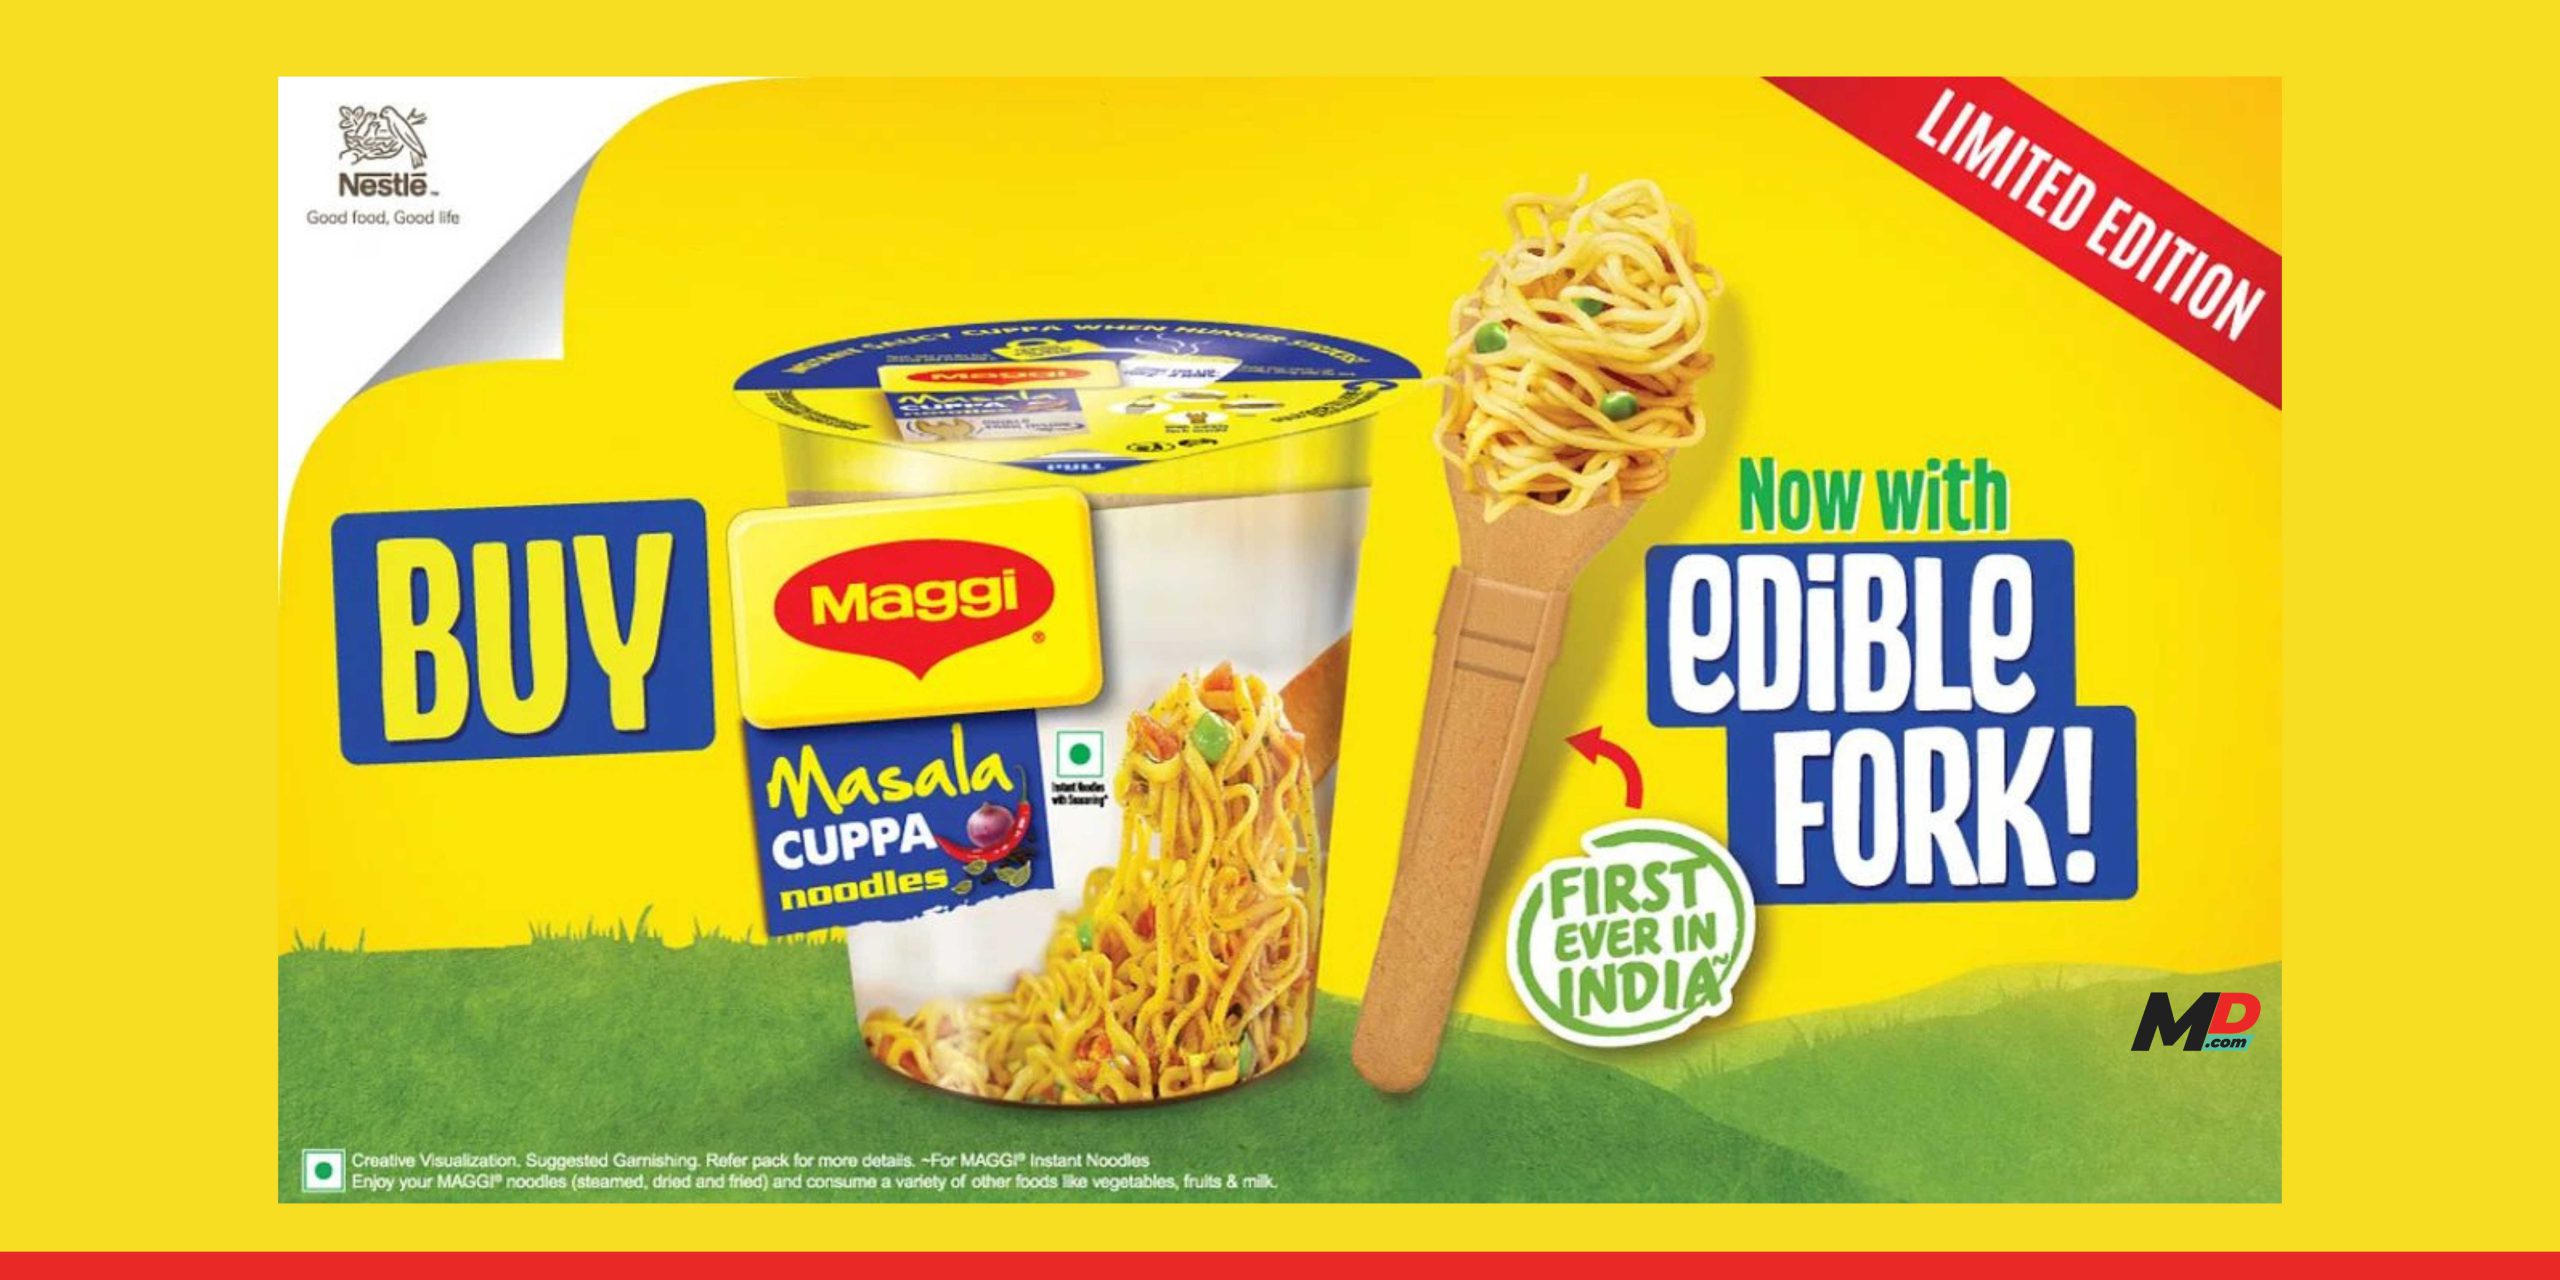 Maggi introduces limited-edition cup noodles with edible fork